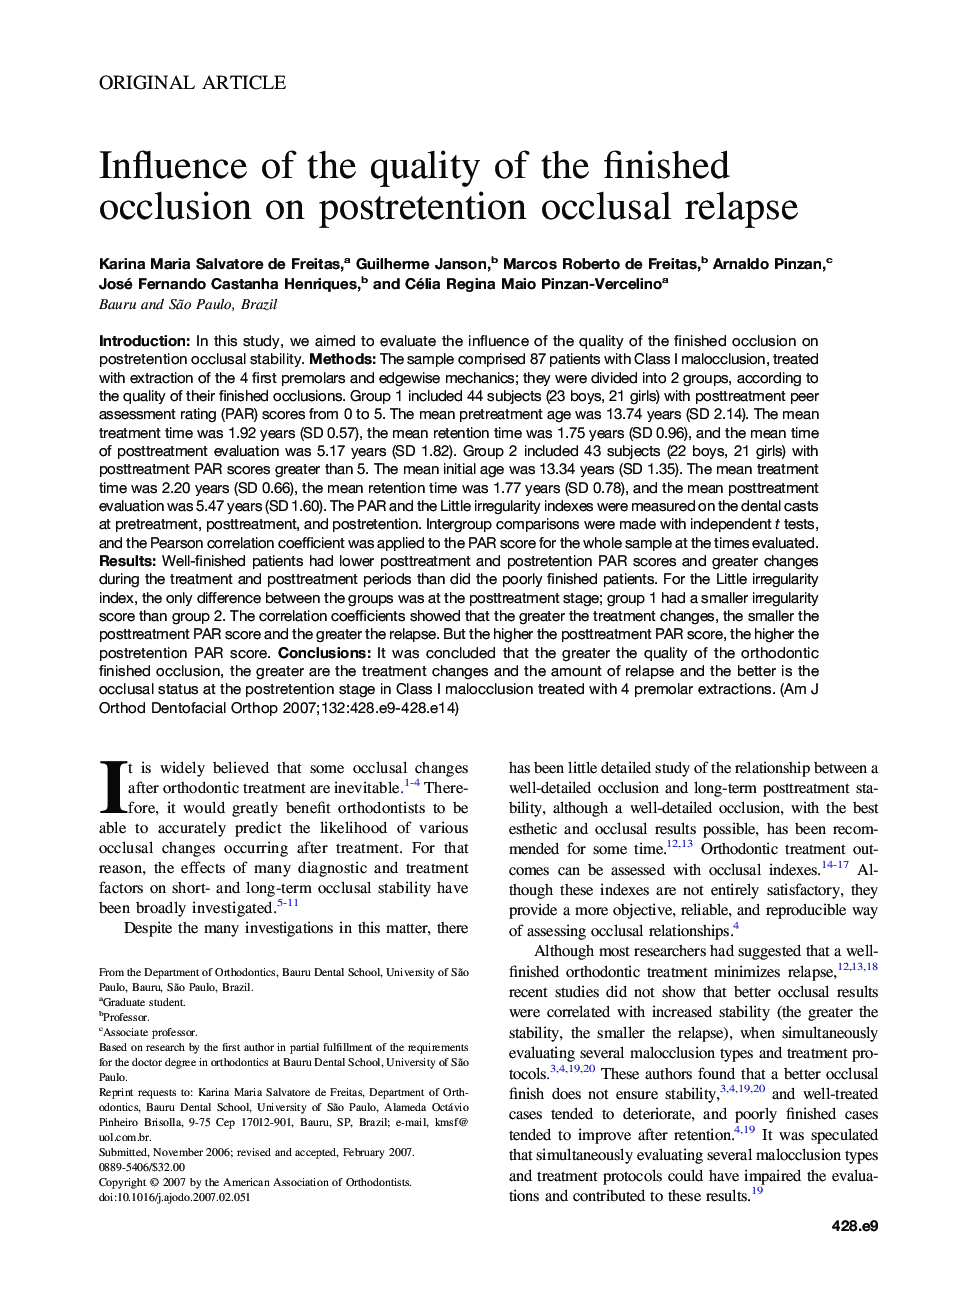 Influence of the quality of the finished occlusion on postretention occlusal relapse